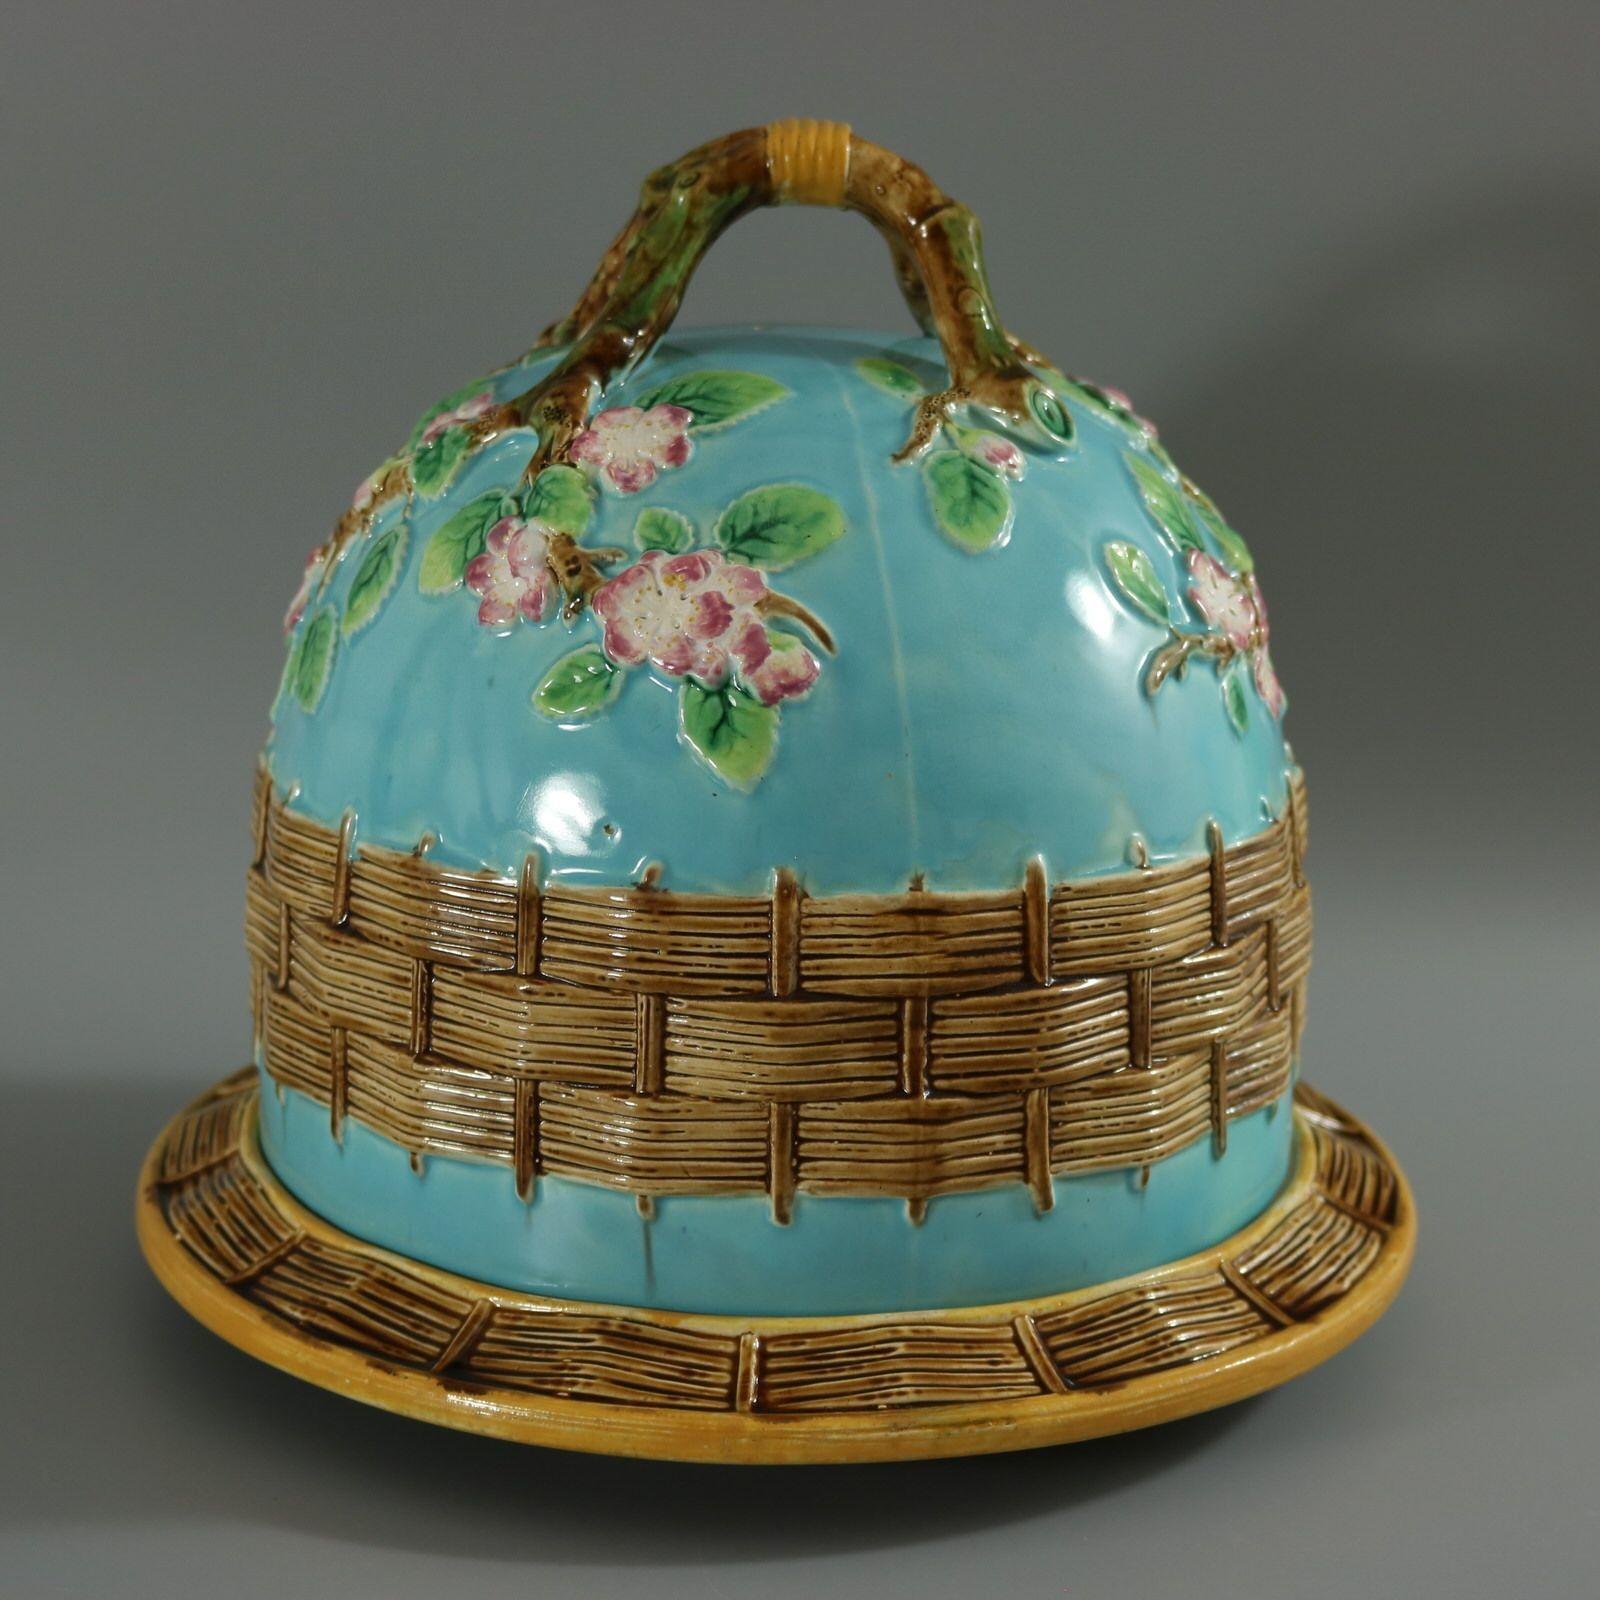 George Jones Majolica cheese keep which features a branch handle with apple blossoms. Turquoise ground version. Colouration: turquoise, brown, green, are predominant. Bears a pattern number, '3243'. English diamond registration mark for the date